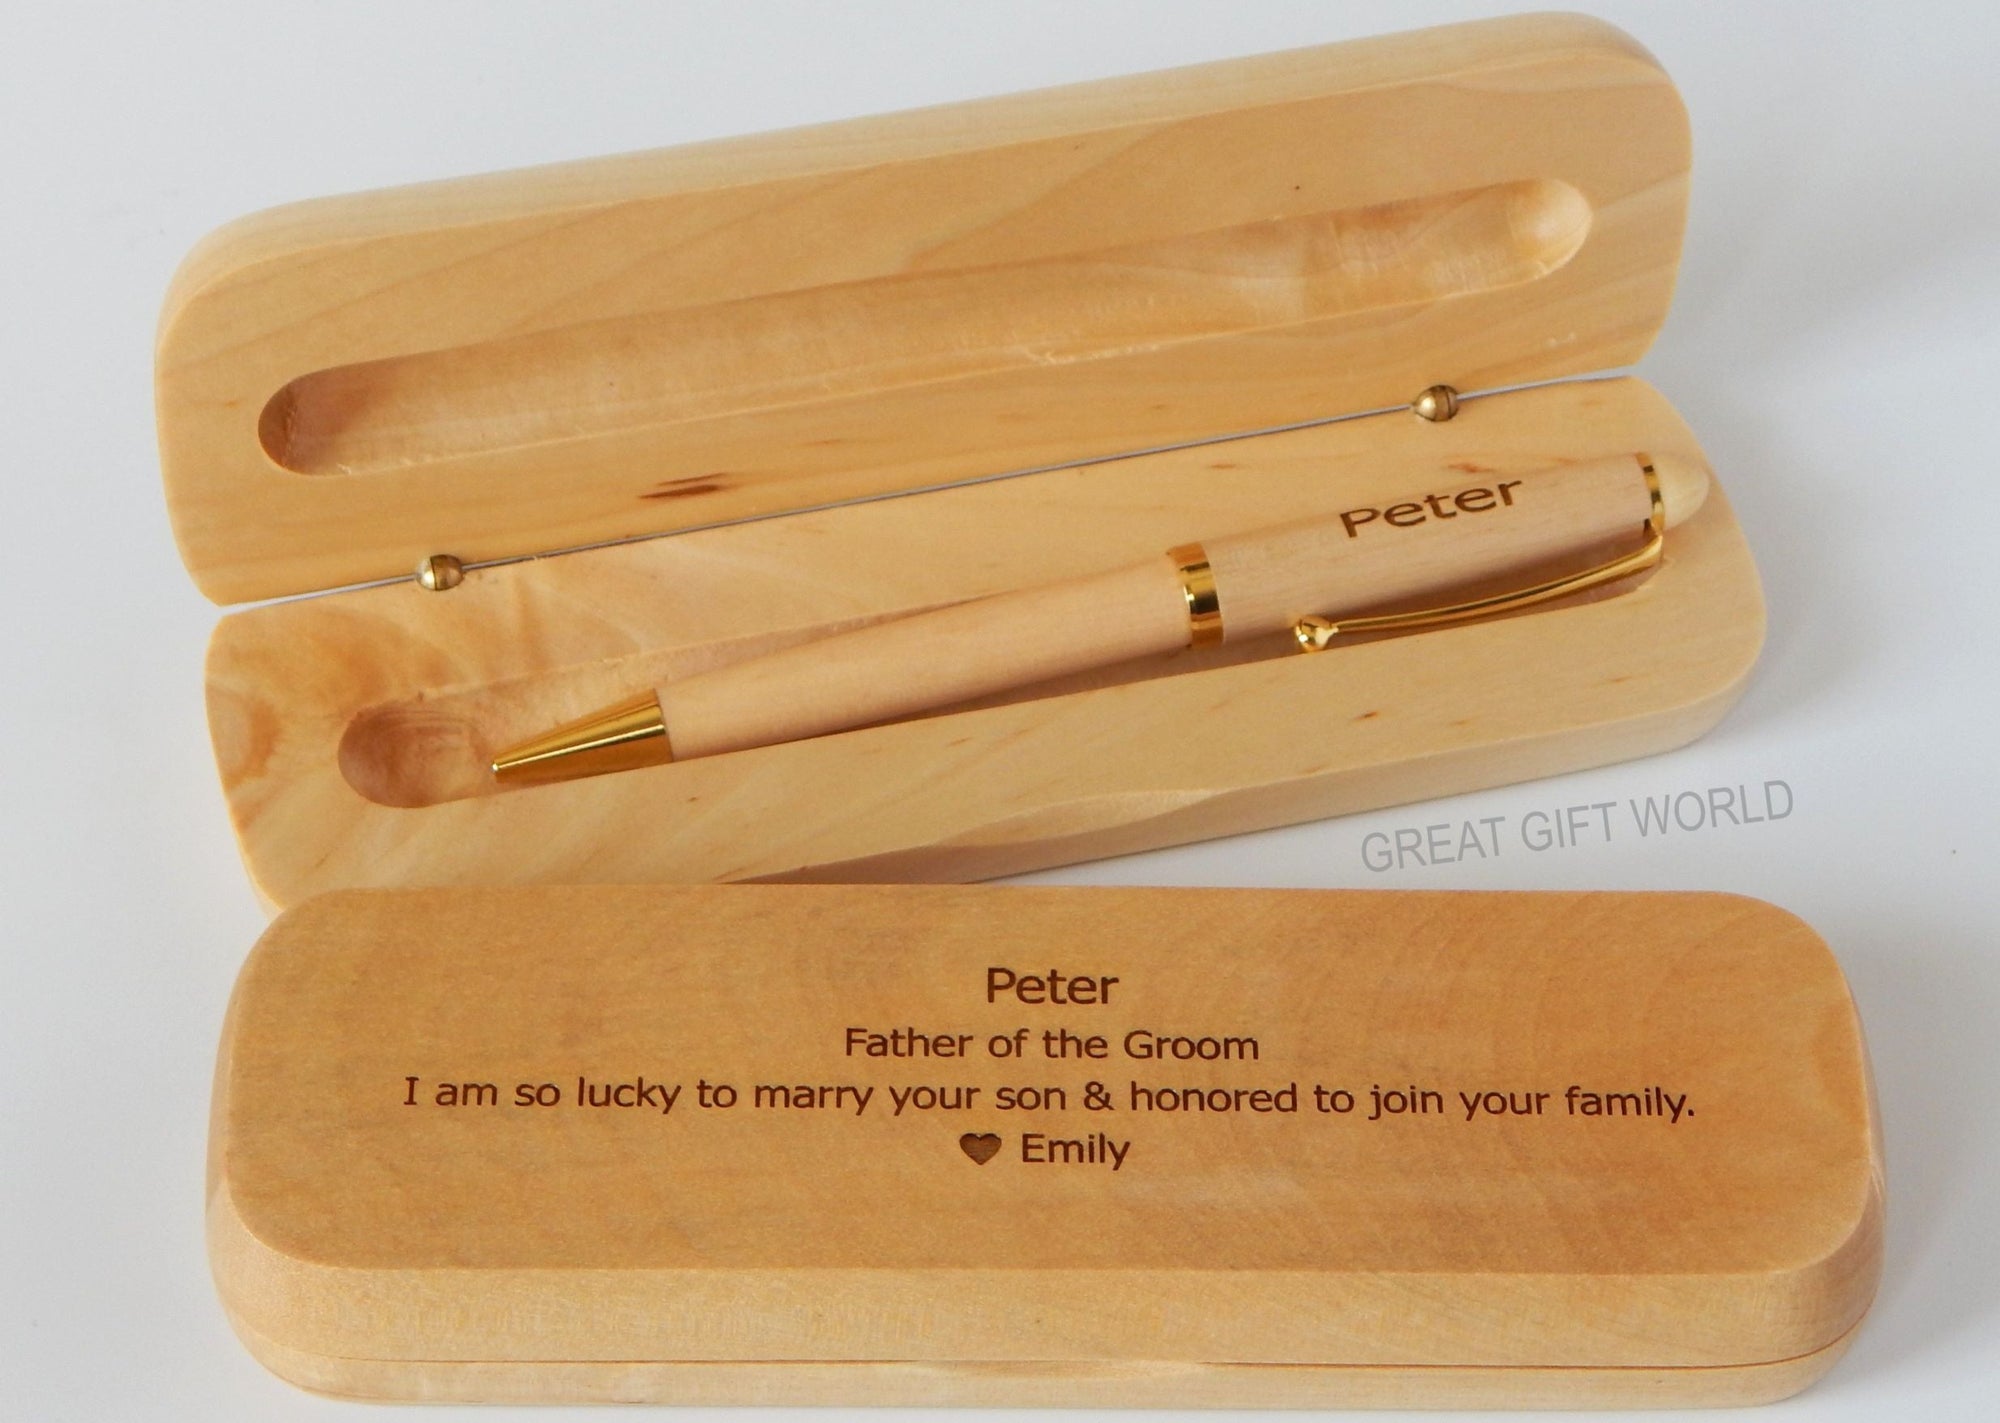 Father of the Groom Gift from Bride | Personalized Wooden Pens